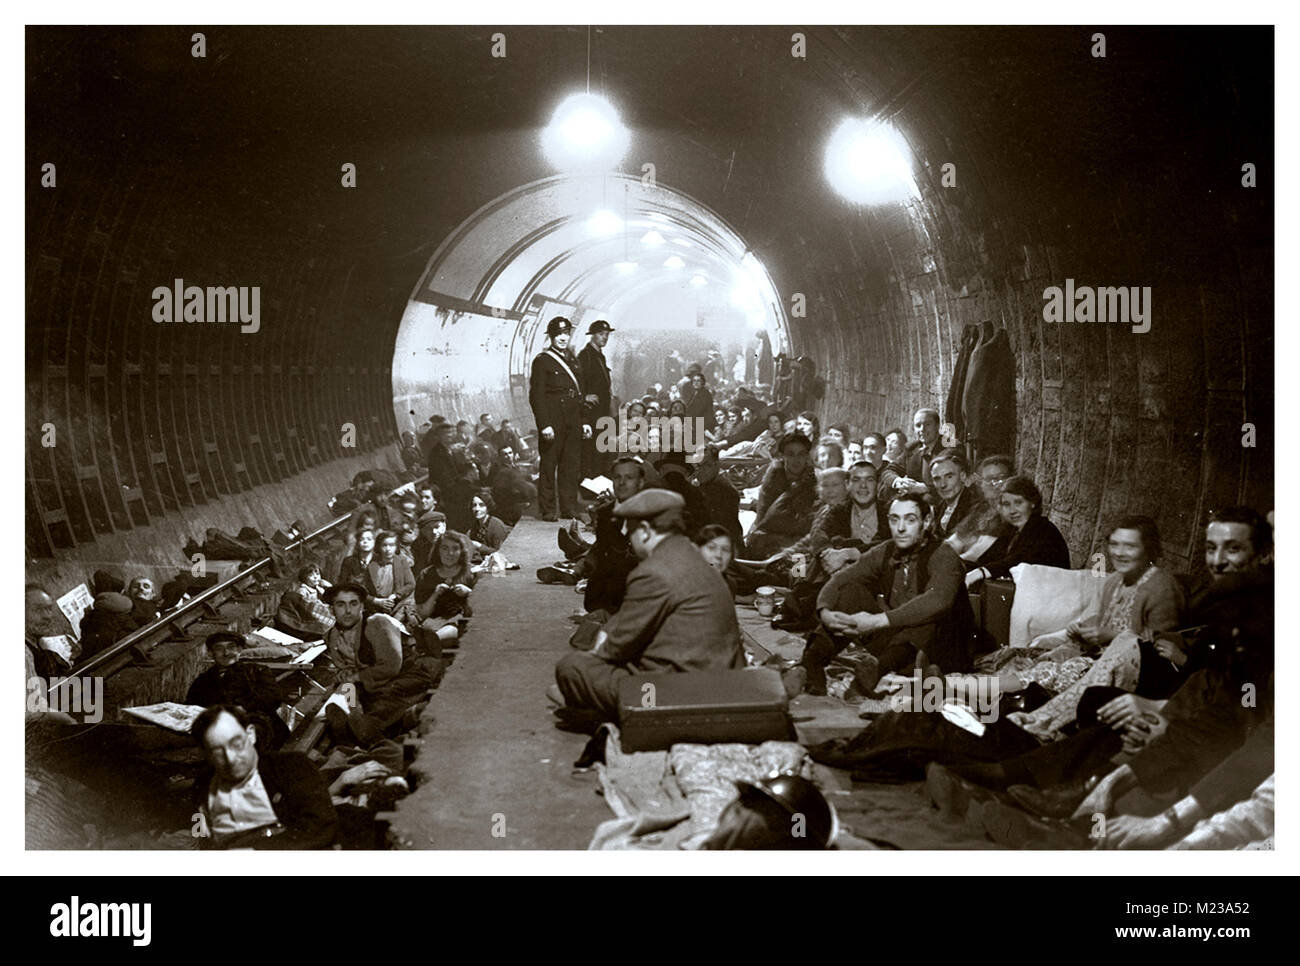 WW2 1940's Underground Station shelter London Blitz.. Tube station acting as a safe haven for London residents against sustained terror bombing by Nazi Germany. Adolf Hitler attempted concentrated aerial bombing of major population centers in England using the Nazi Luftwaffe as a tool to attempt to terrorise local UK resident population Stock Photo